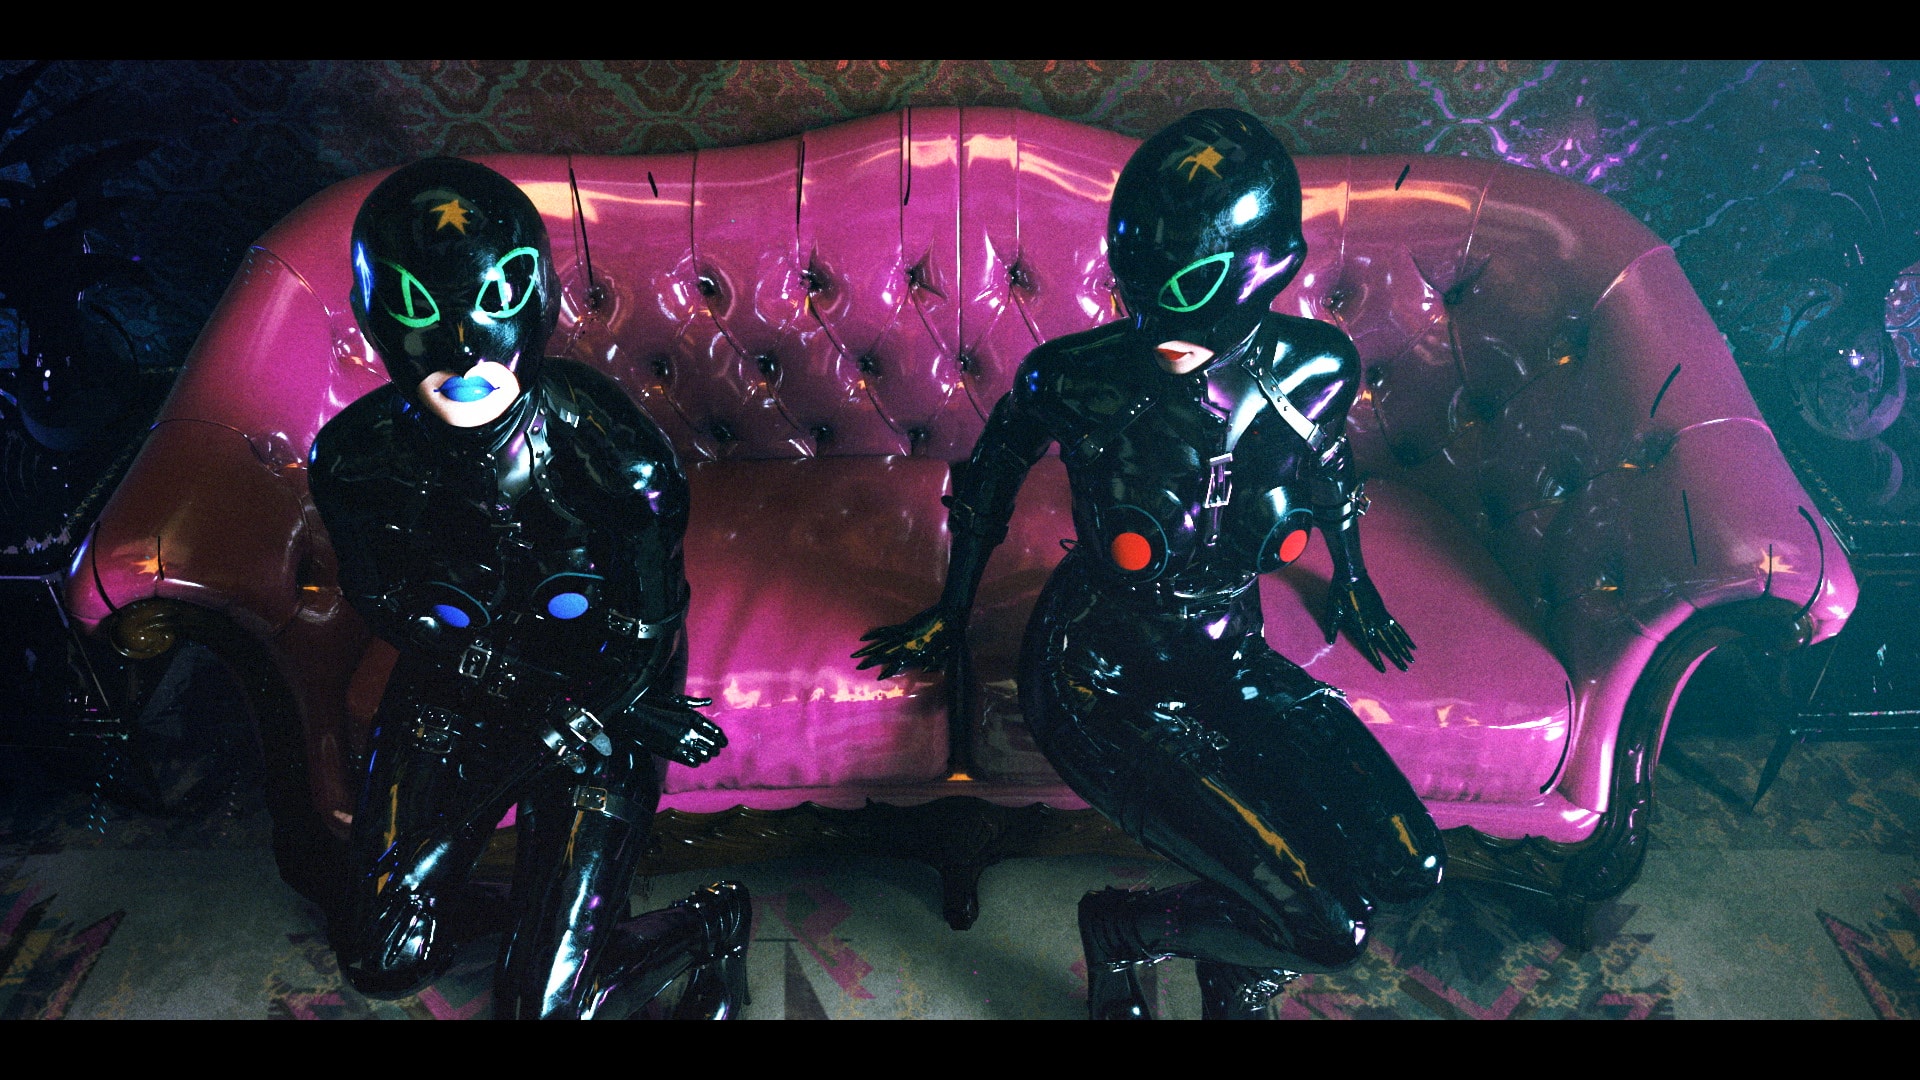 Fishnight Sex - The sexualisation in Love, Death & Robots overshadows the high ...